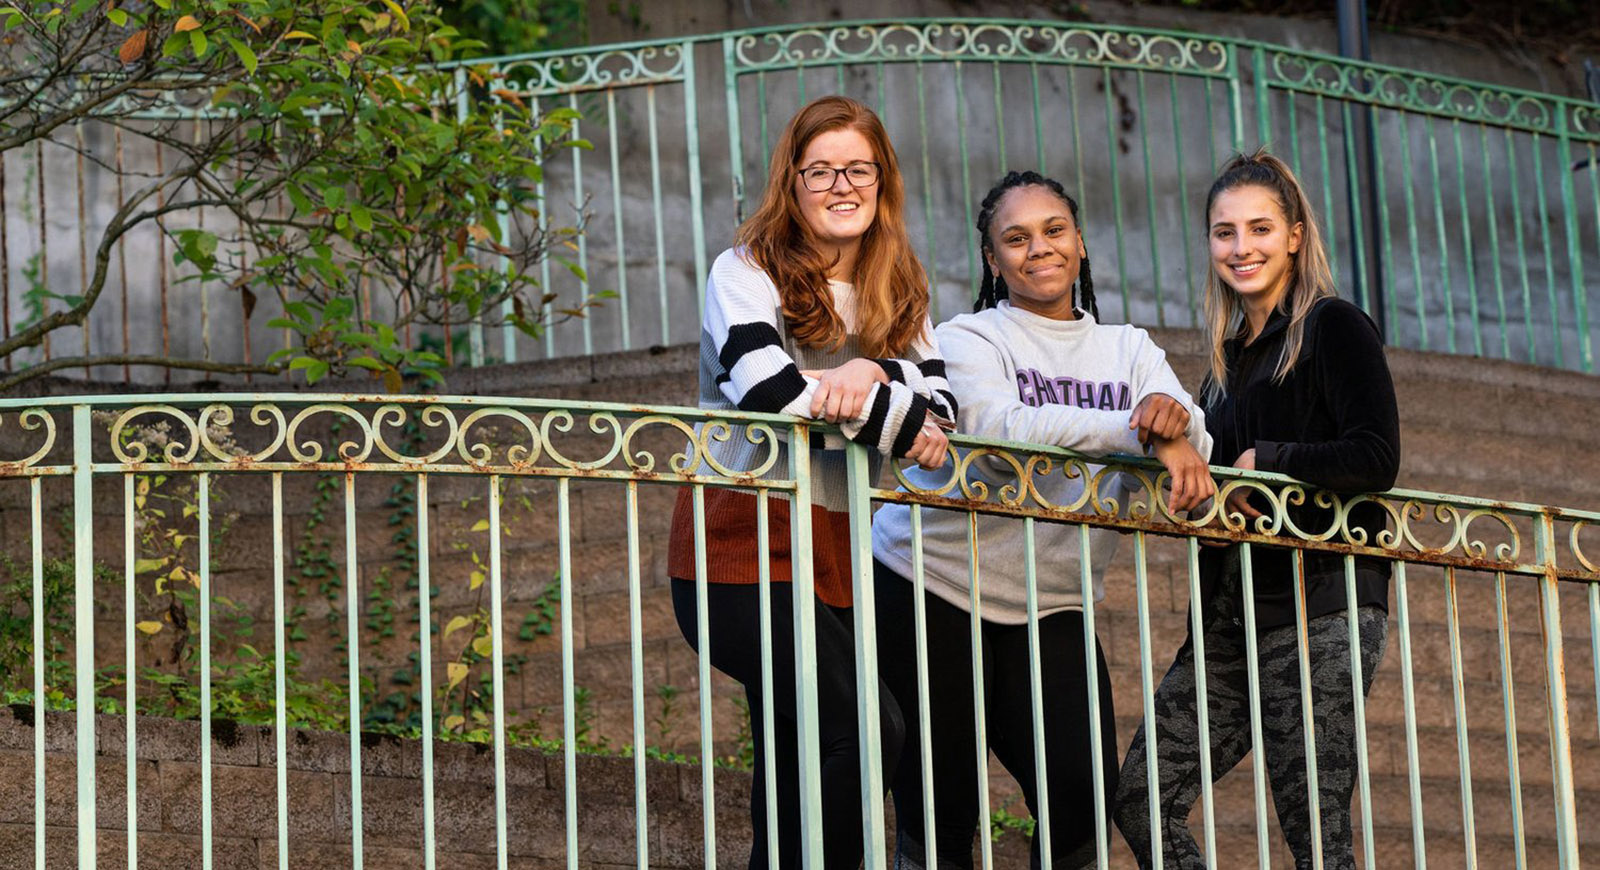 Photo of three Chatham University ELOTD students posing in front of gate